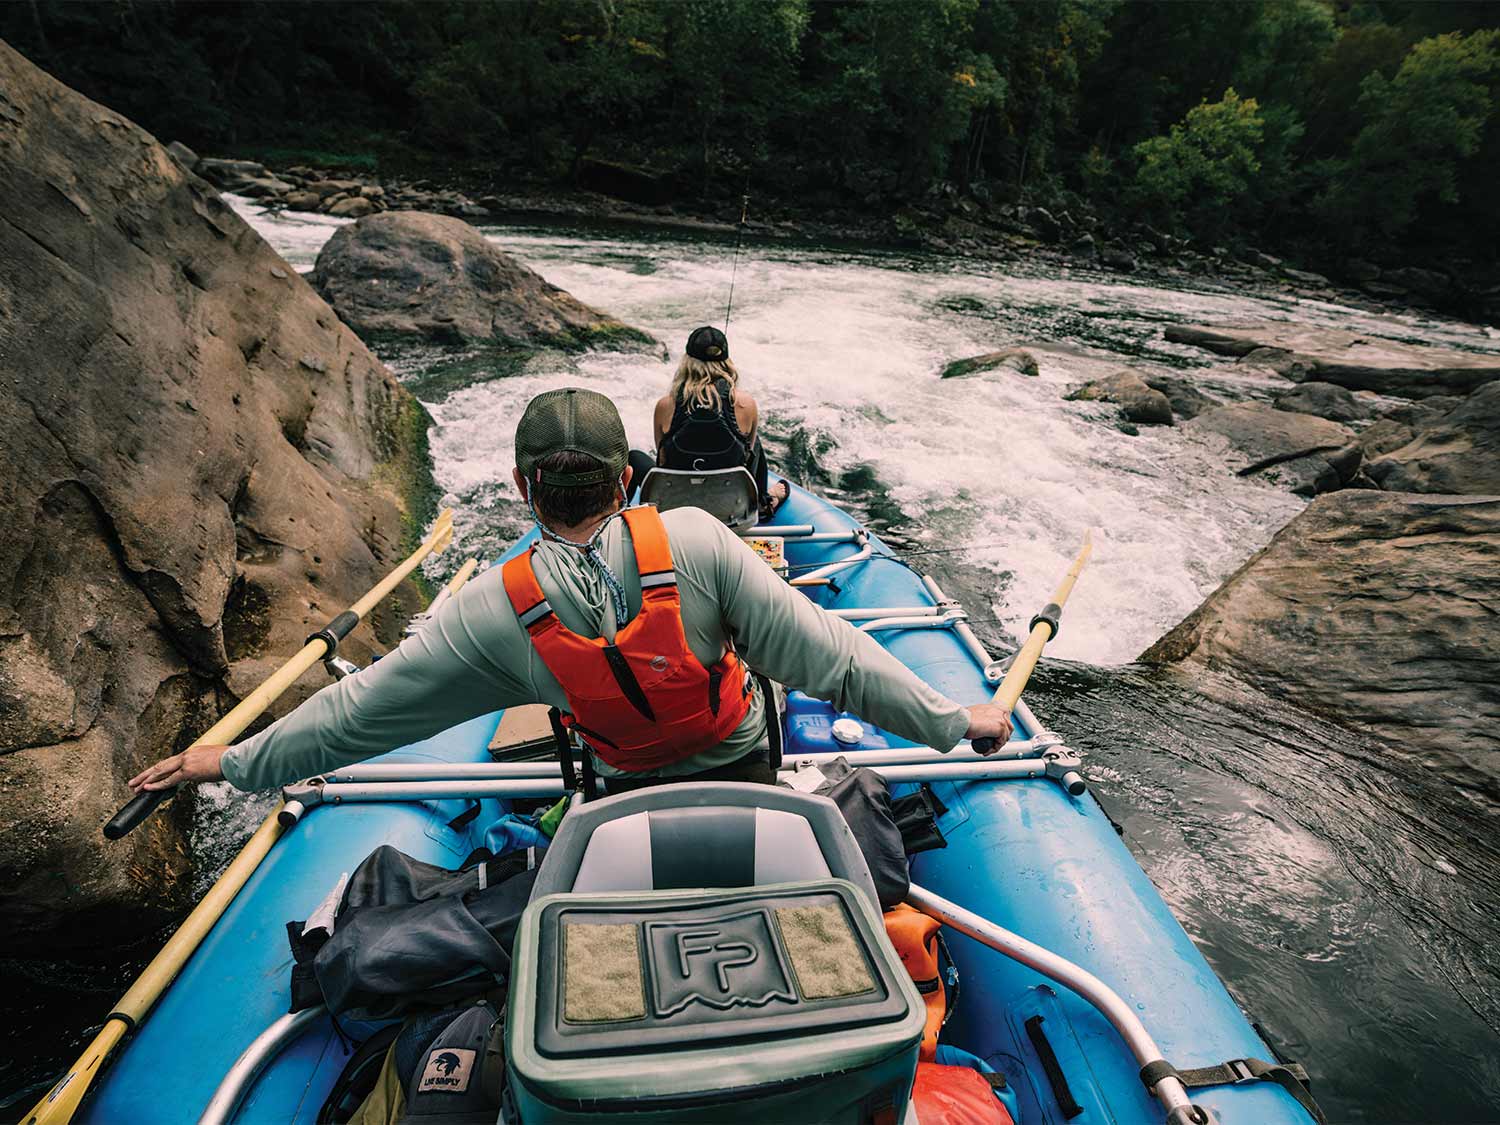 Anglers rafting down a river.